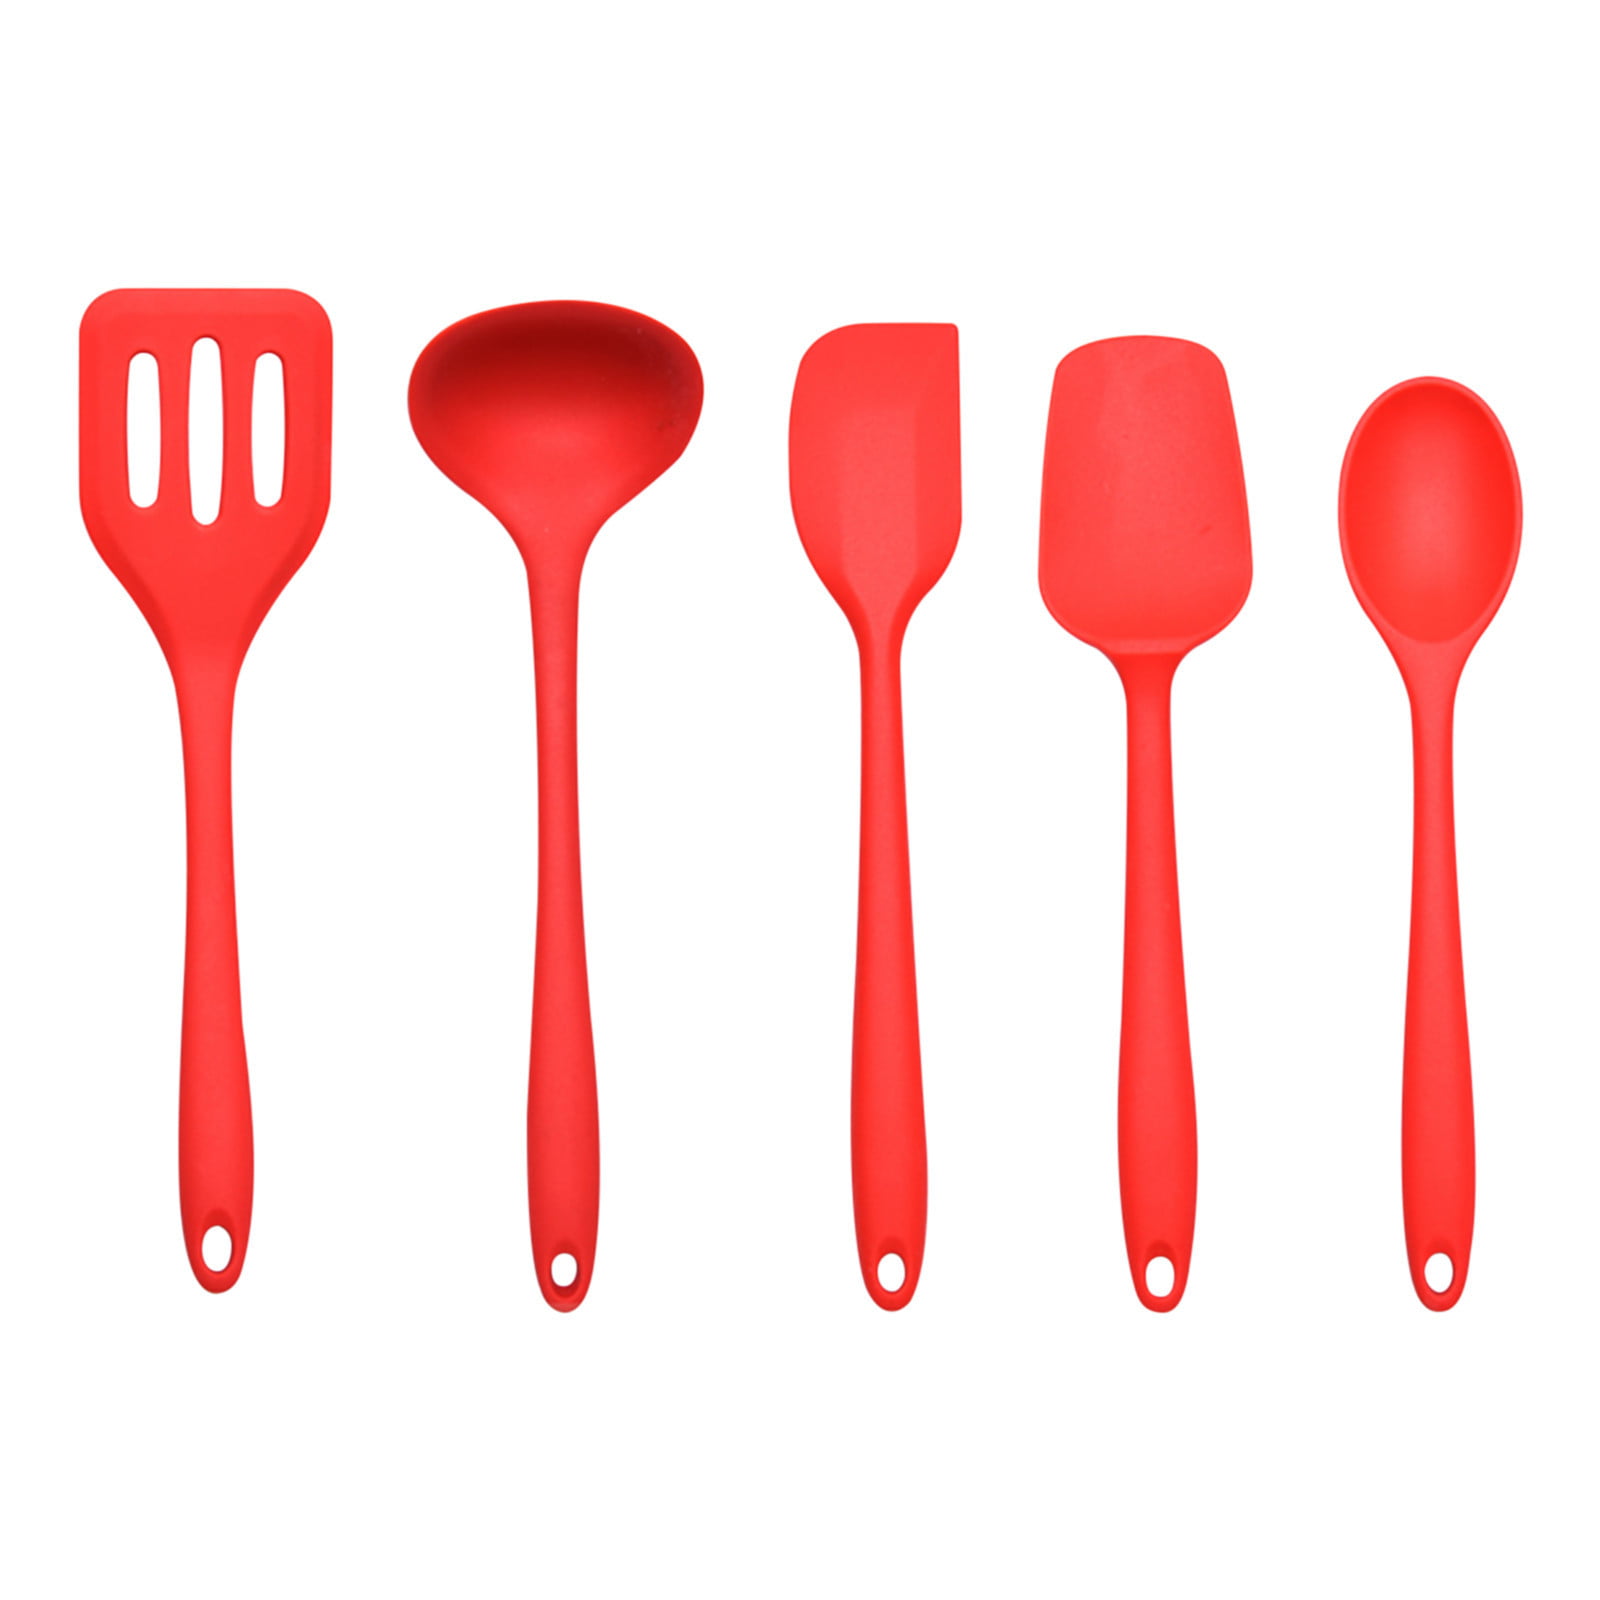  Country Kitchen 5 Pc Silicone Cooking Utensils, Kitchen Tools,  Easy to Clean Silicone Kitchen Utensil Set, Silicone Spatula Set for  Nonstick Cookware - Red and Gunmetal : Home & Kitchen